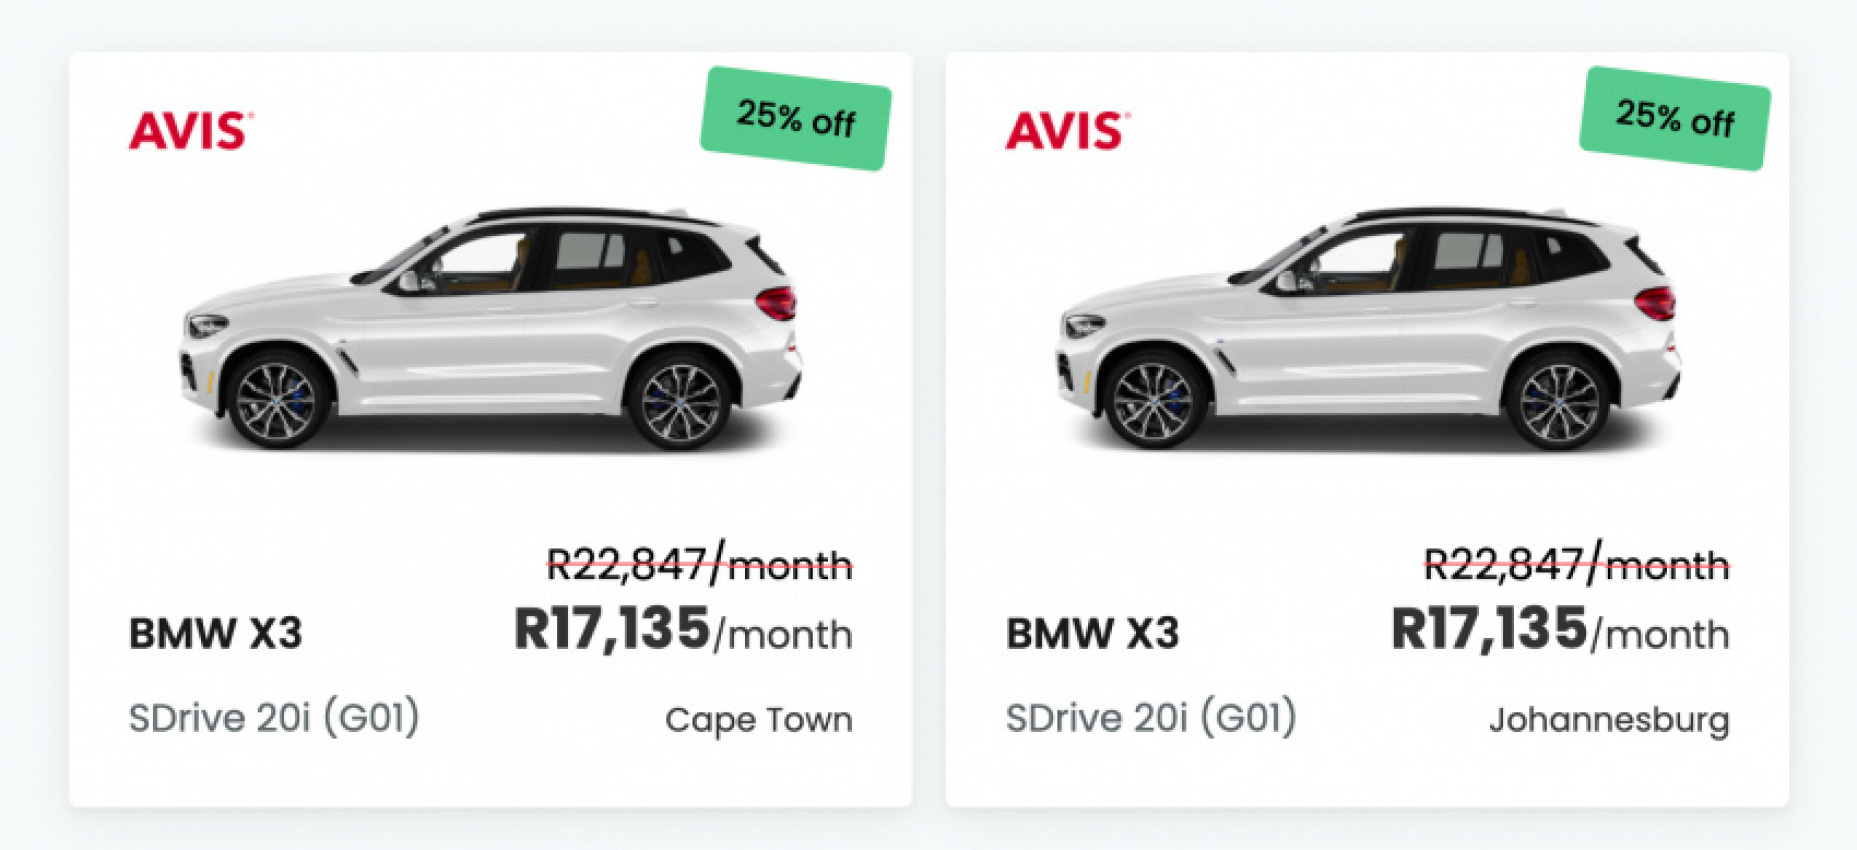 autos, bmw, cars, features, audi, bmw x3, flexclub, mercedes-benz, how much its costs to rent a bmw x3 for a month